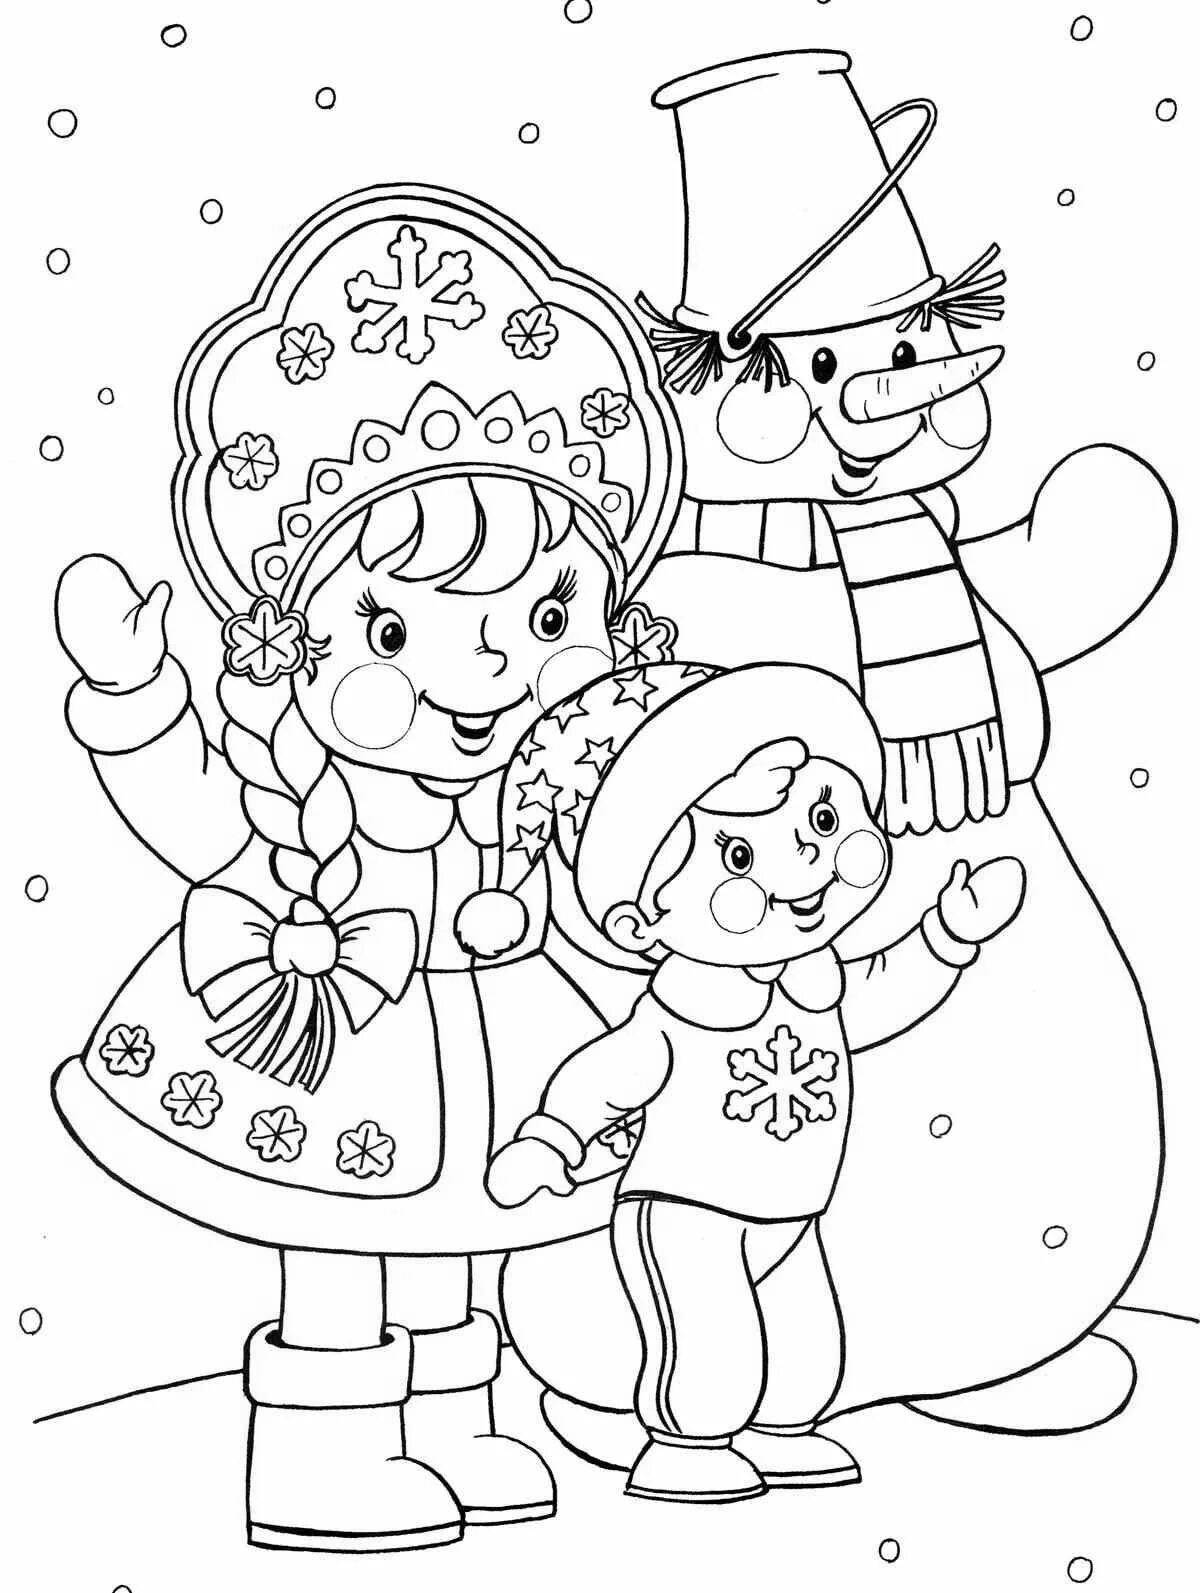 Children's Christmas coloring color-frenzy